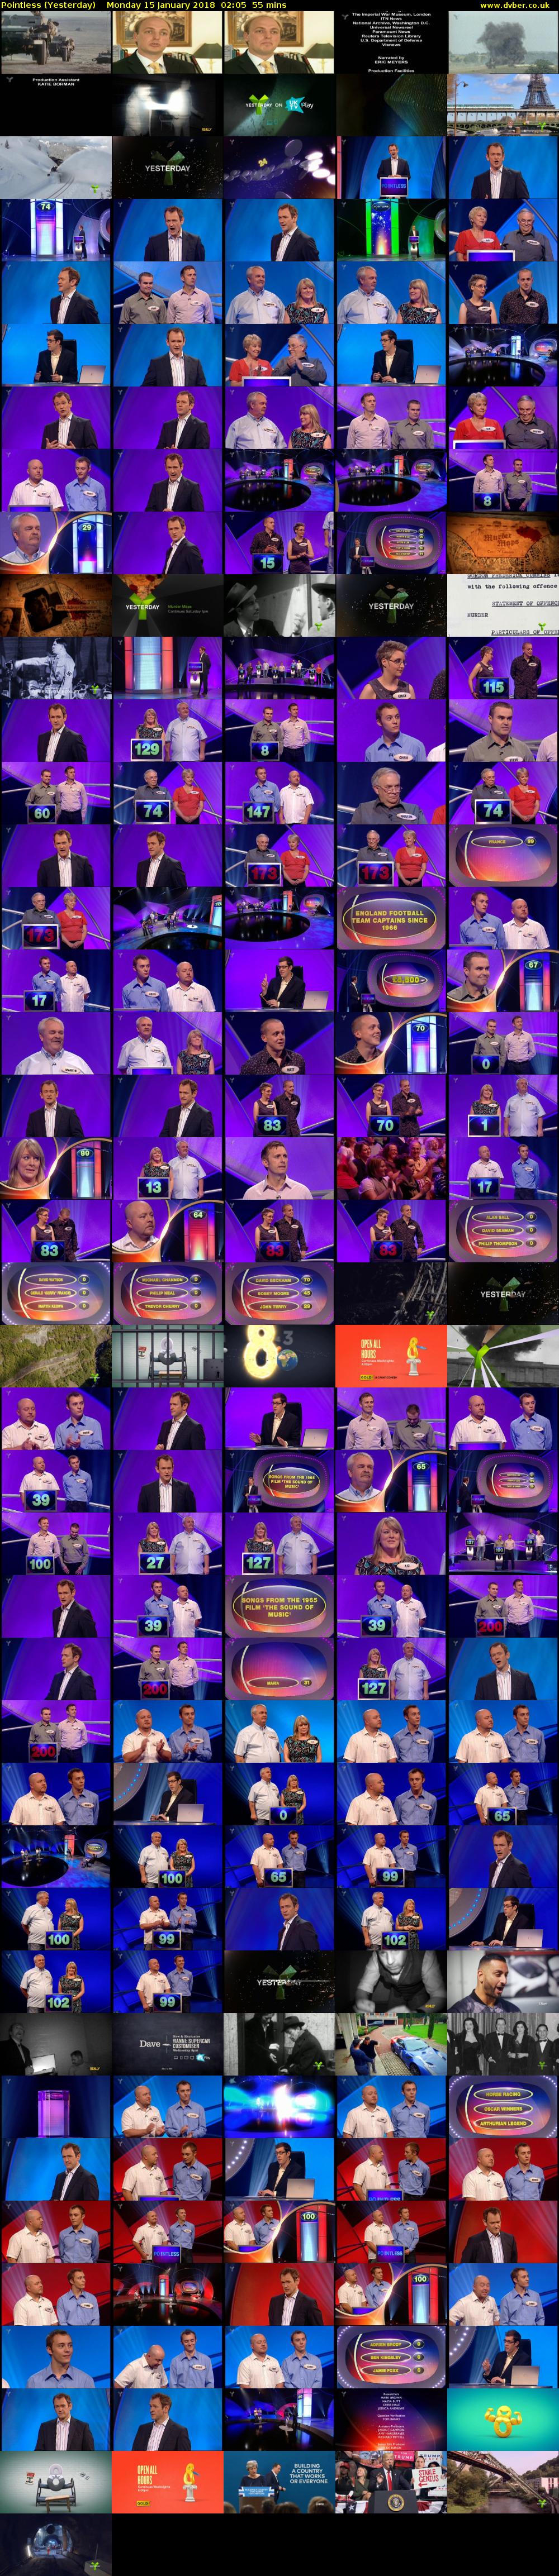 Pointless (Yesterday) Monday 15 January 2018 02:05 - 03:00